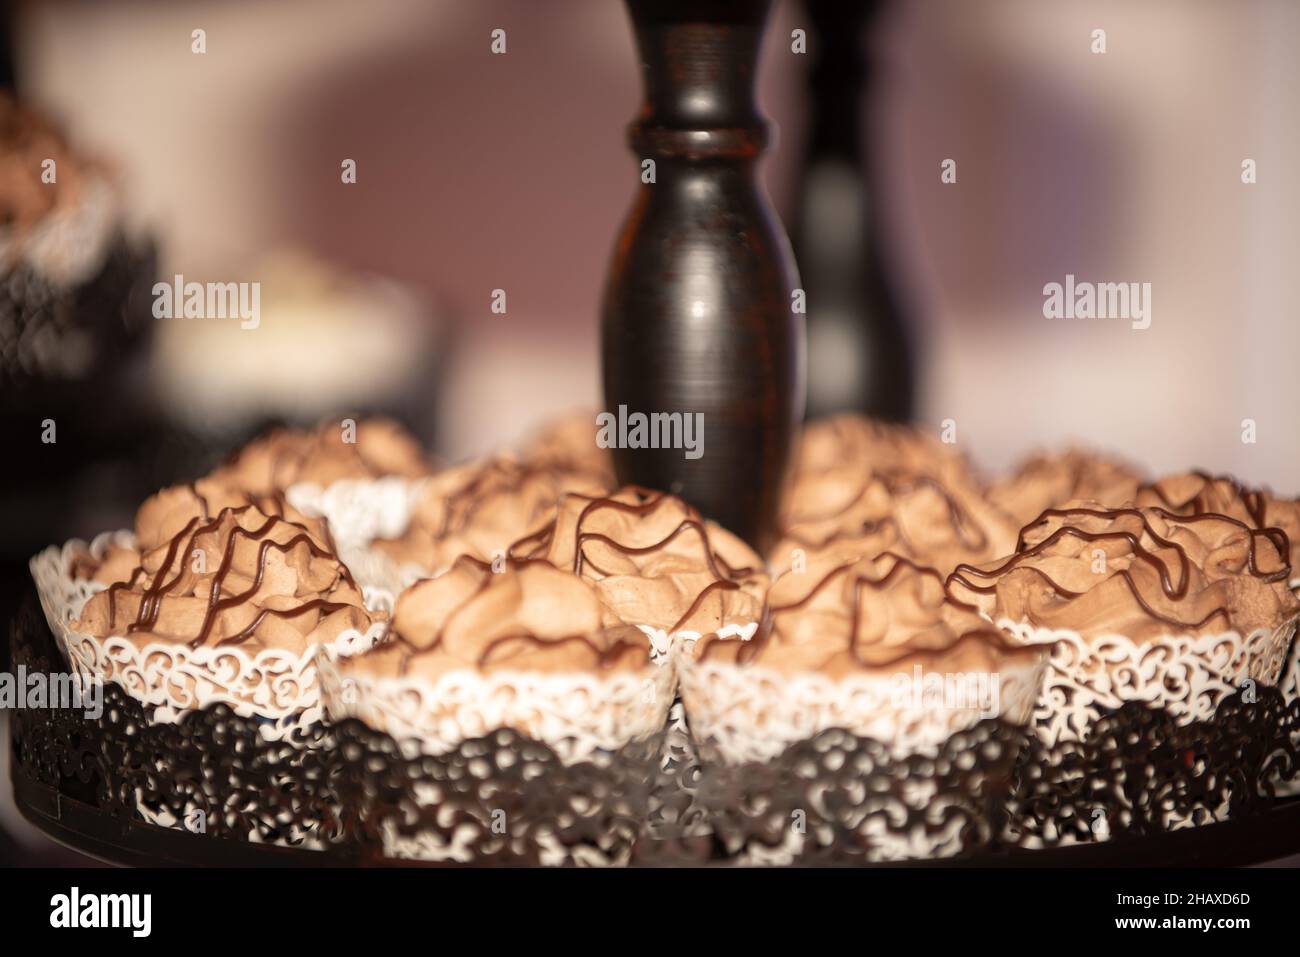 Black ast iron ornate cupcake tower with chocolate cupcakes that have chocolate fuge drizzle Stock Photo